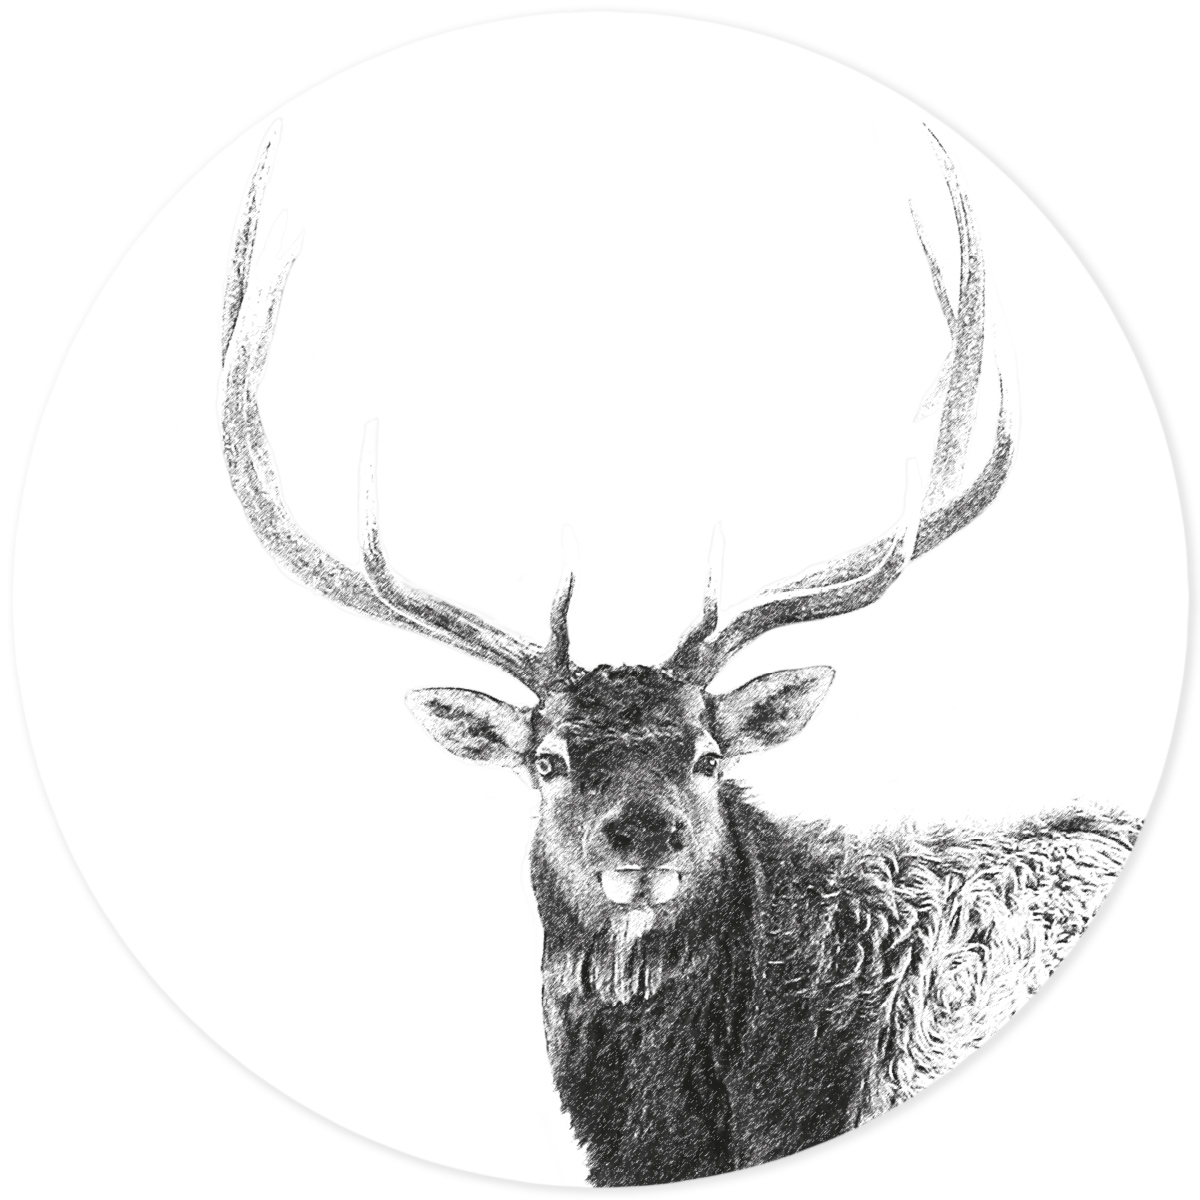 Villa Madelief 150cm Black And White Deer Wall Sticker